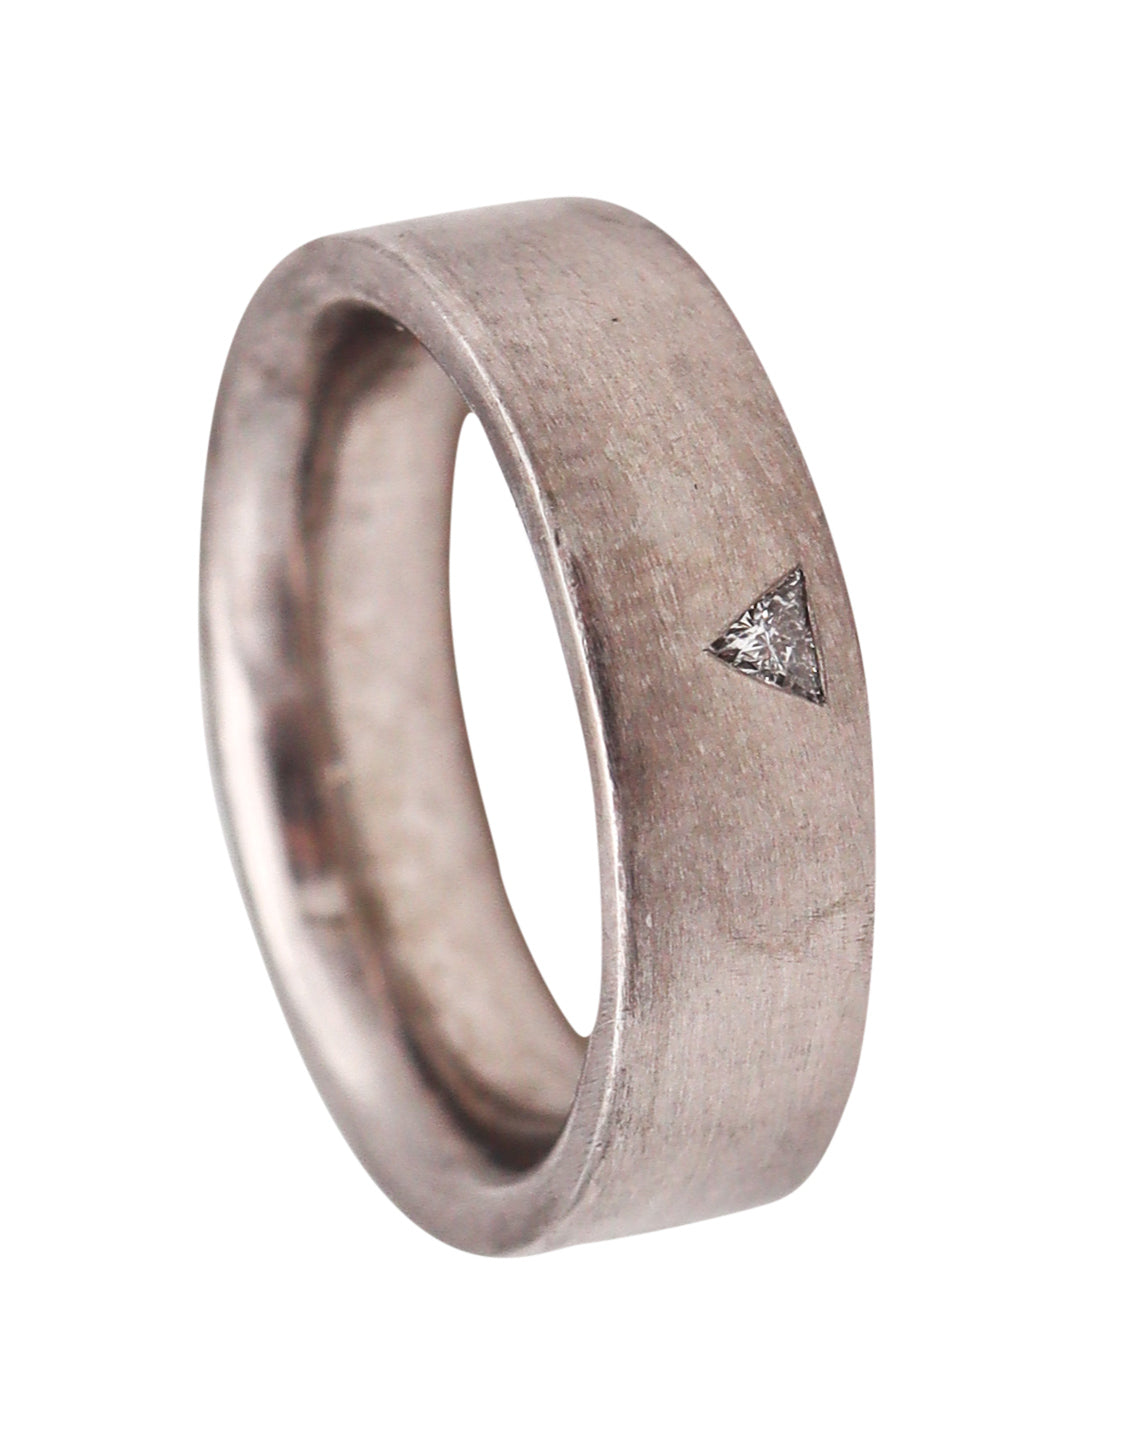 Henrich And Denzel Germany Bauhaus Band Ring In Platinum With VVS Trillion Cut Diamond